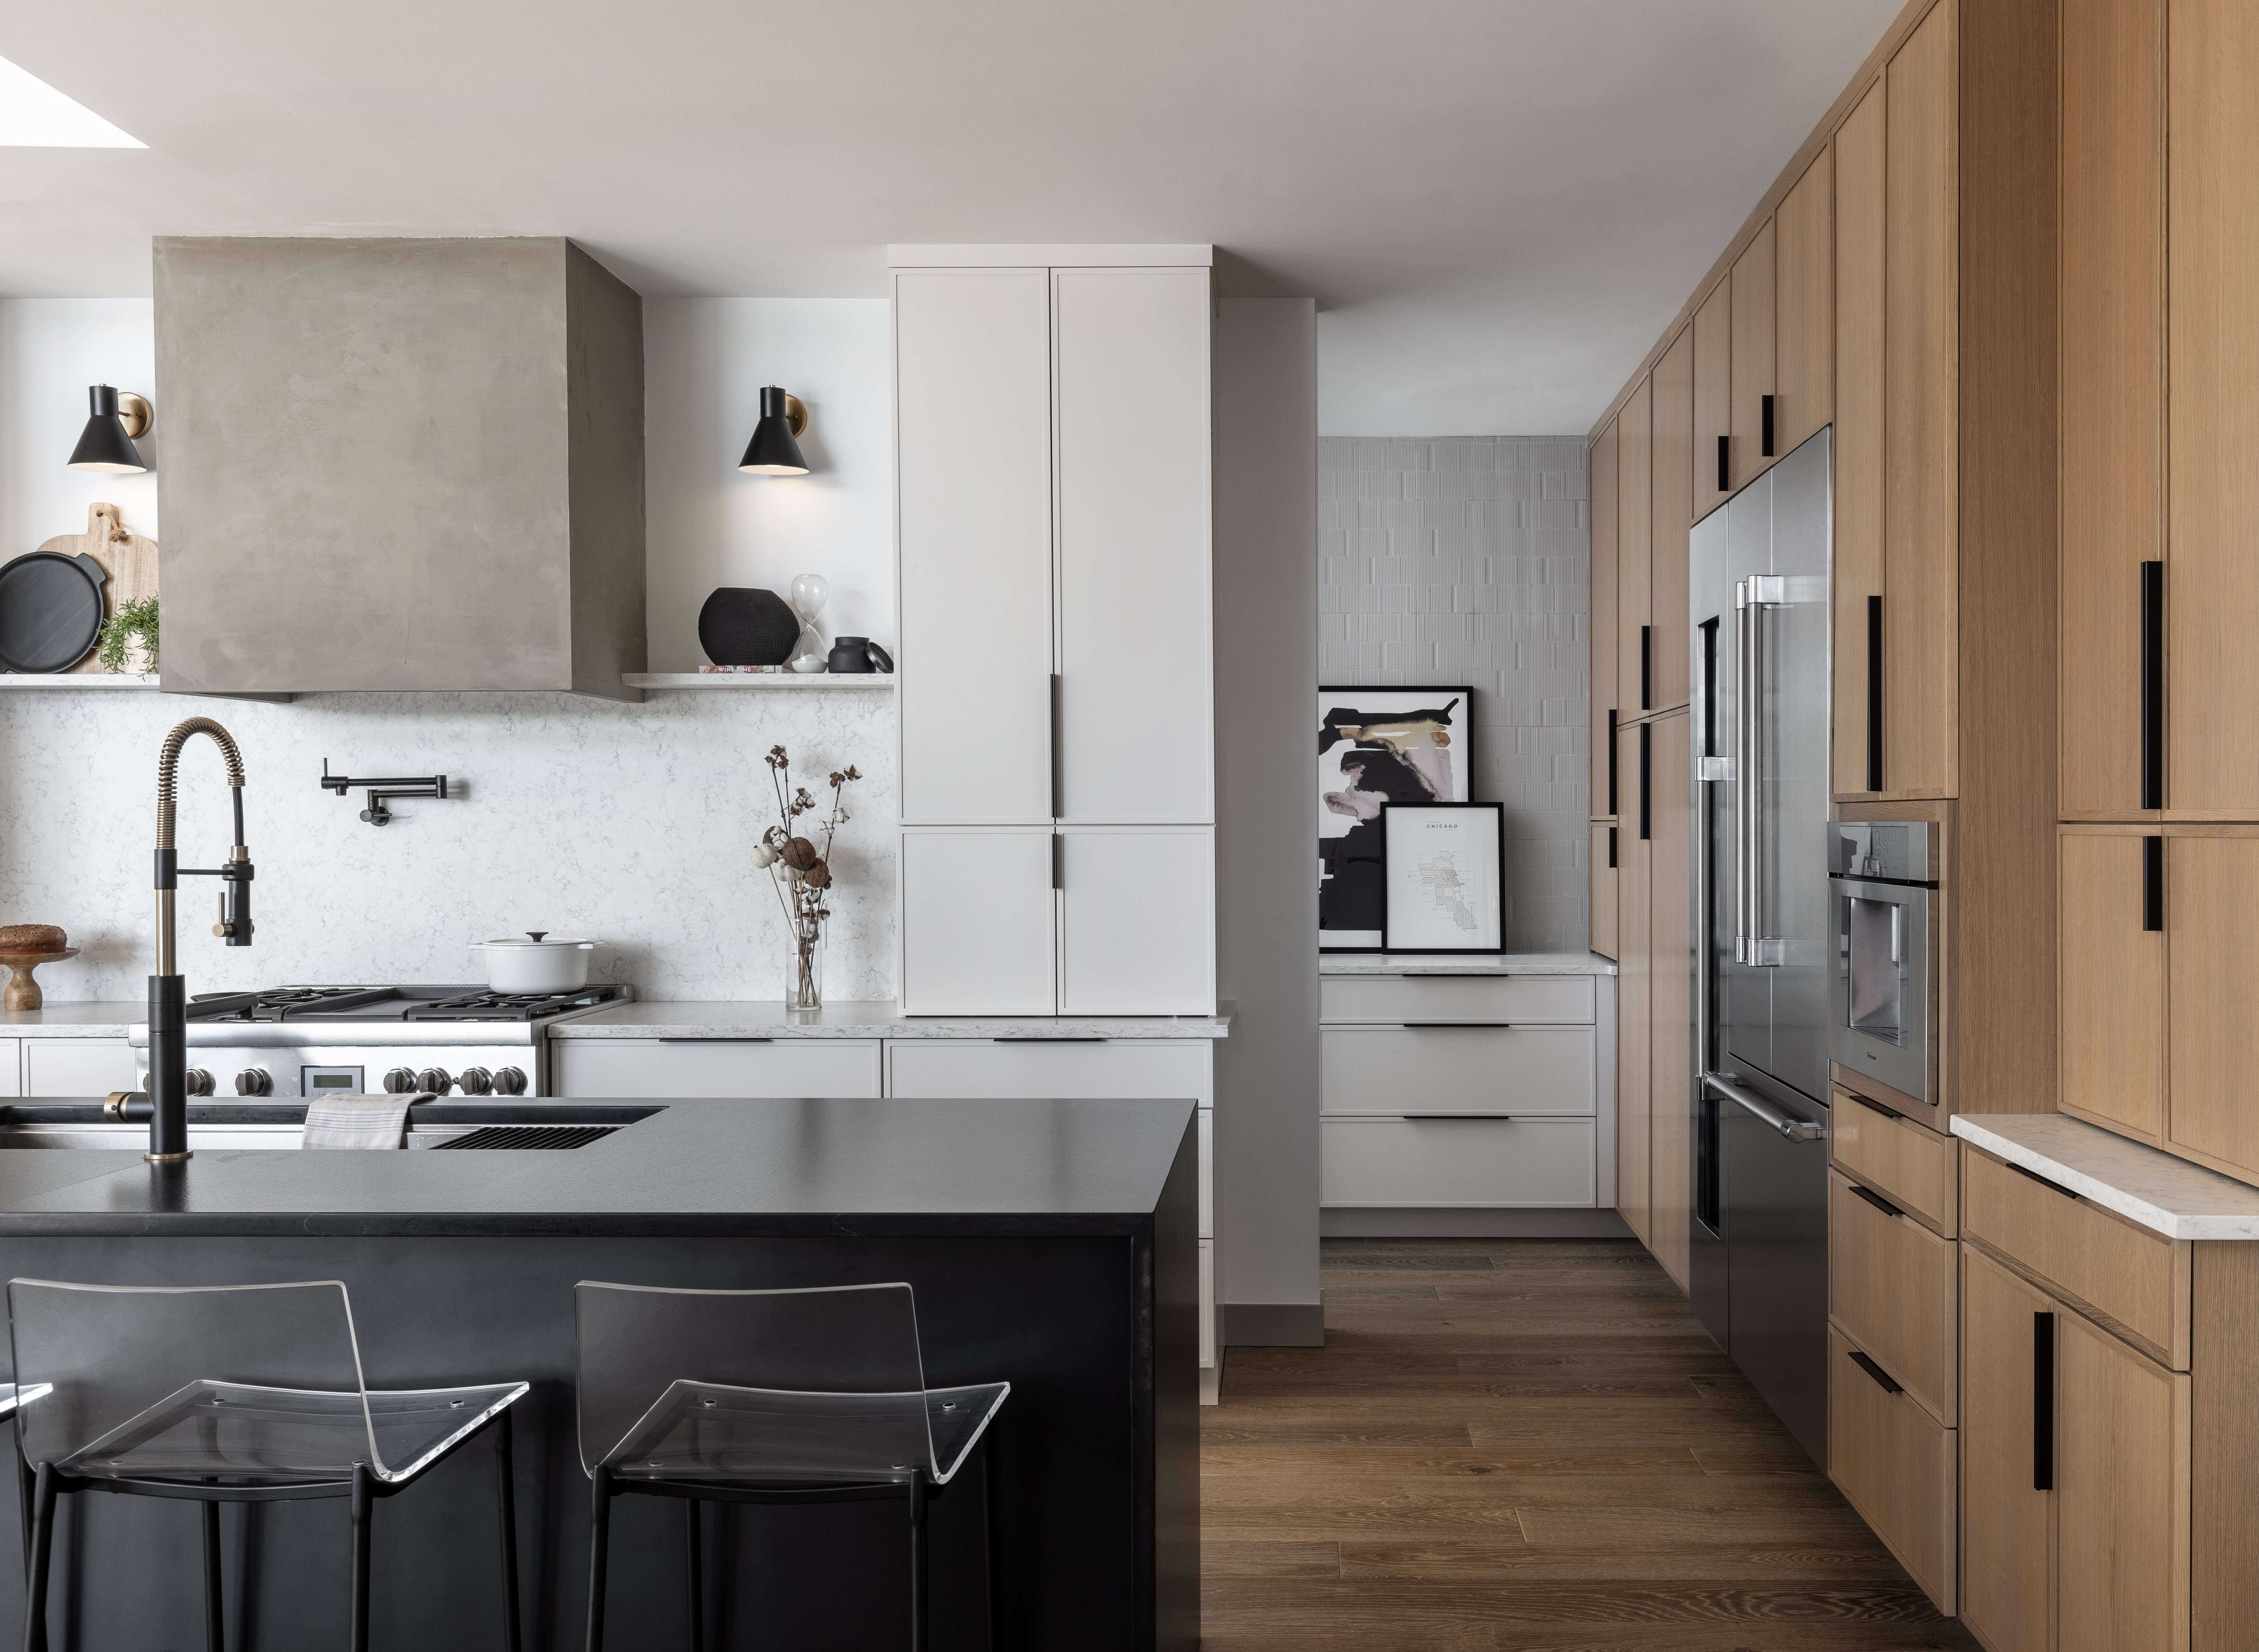 Less is more in this luxurious and simplistic kitchen remodel with skinny shaker doors and a modern hood.